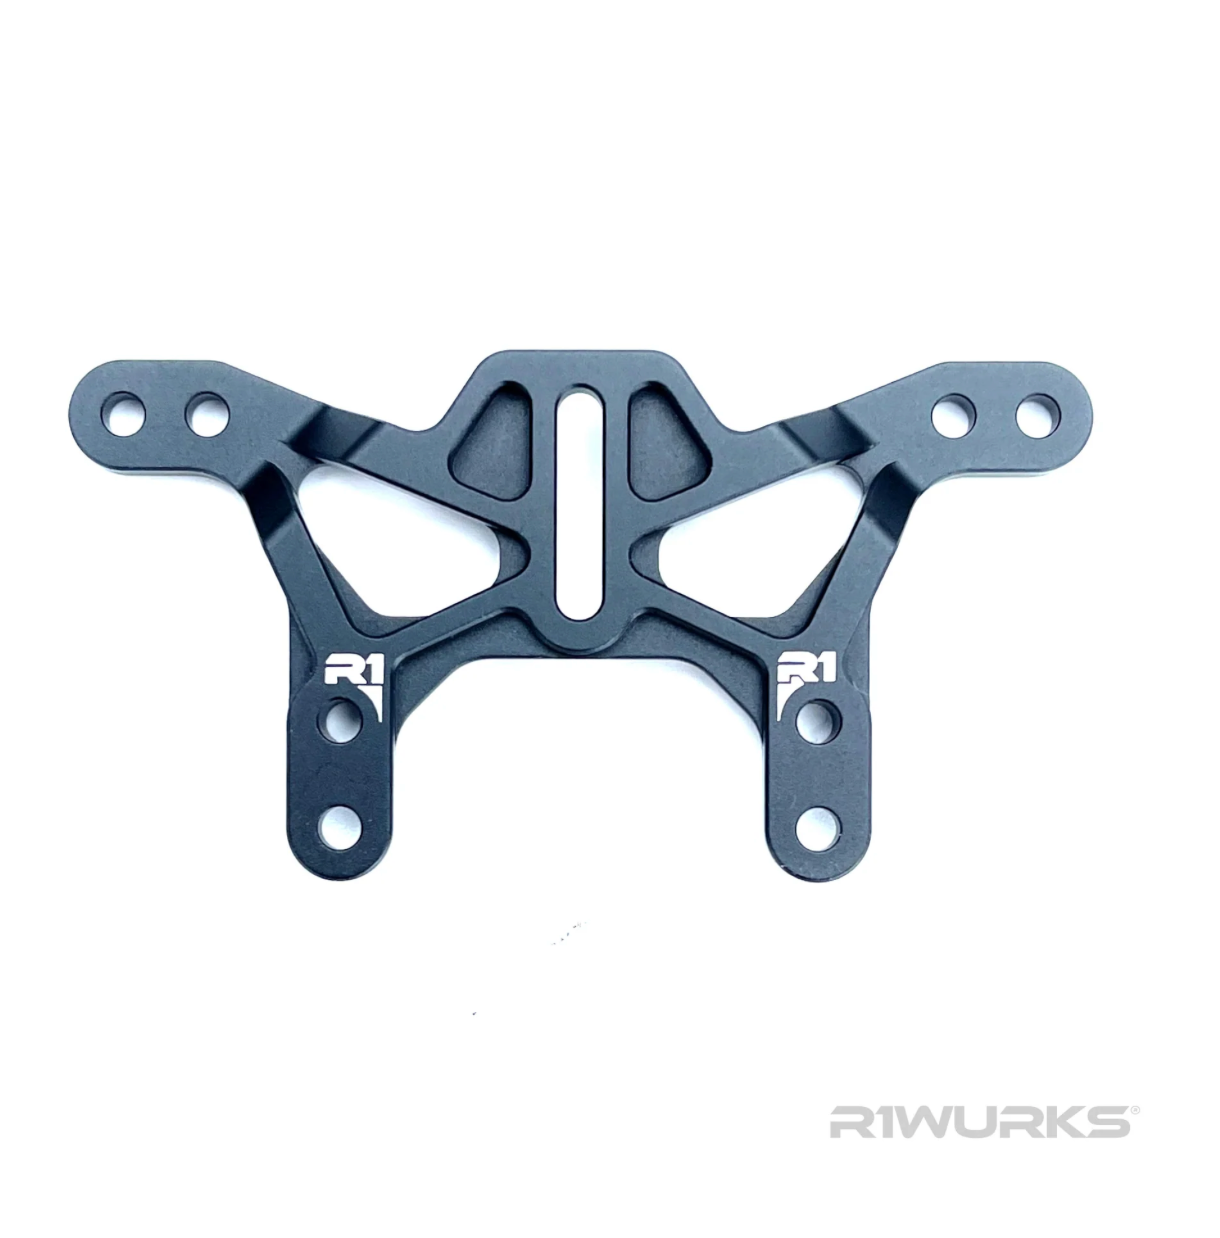 R1 Wurks DC1 Front Shock Tower, Aluminum